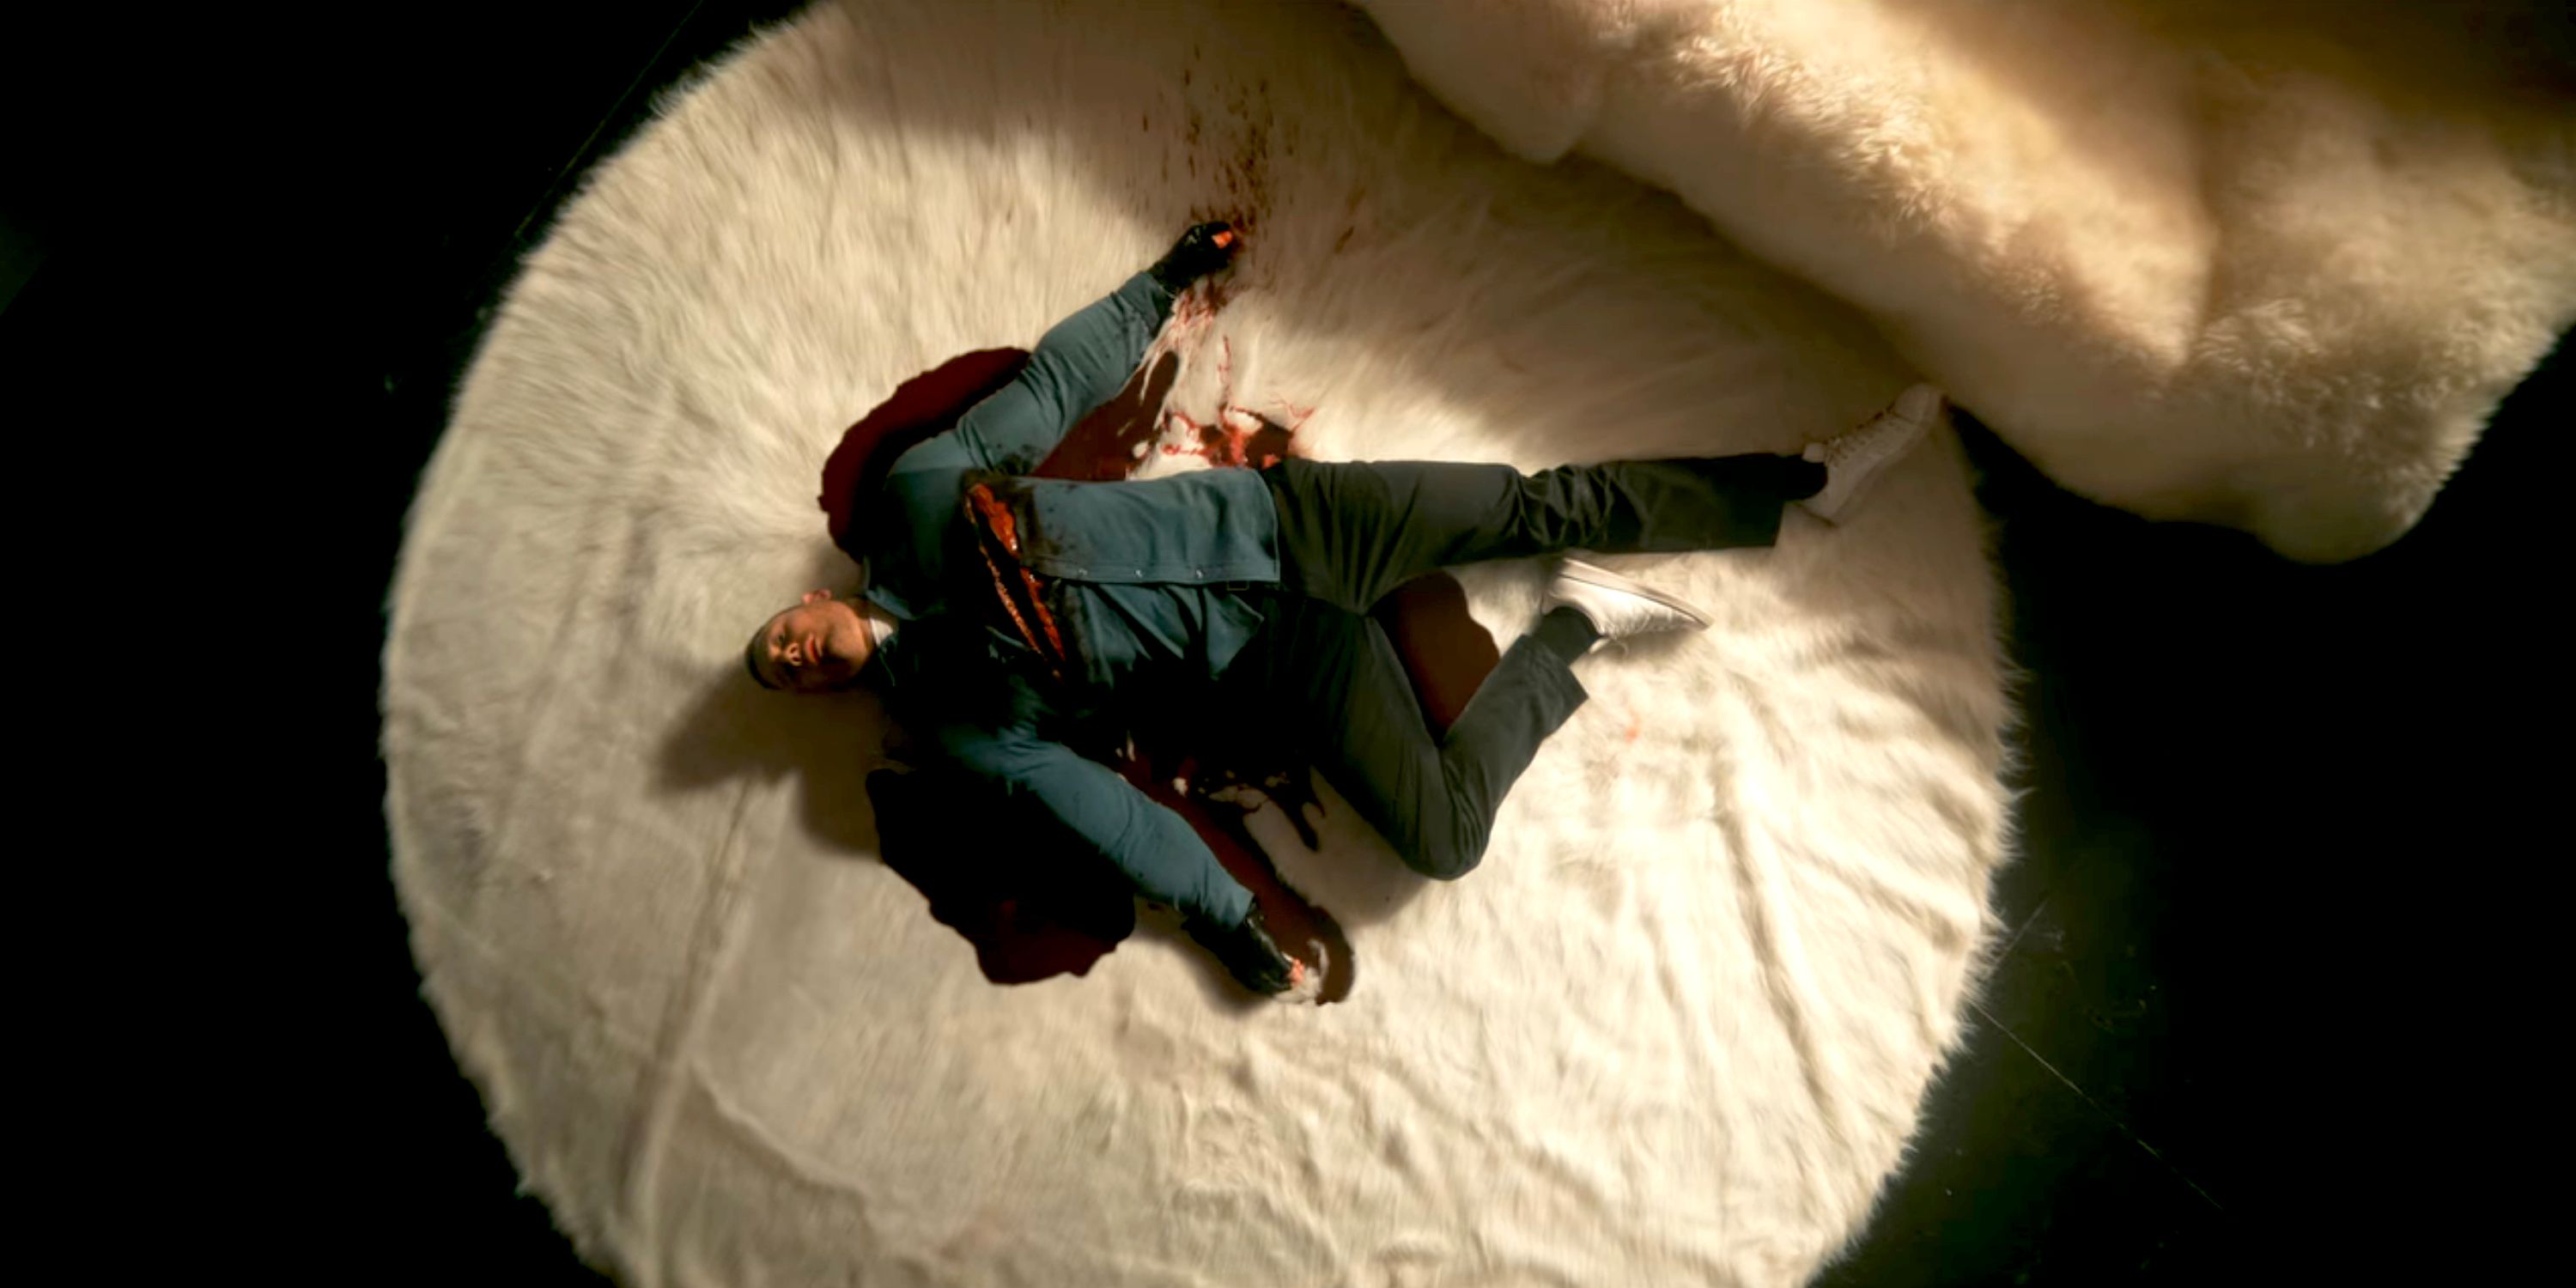 Luther lying dead on a white rug, blood pooling out from above both of his shoulders